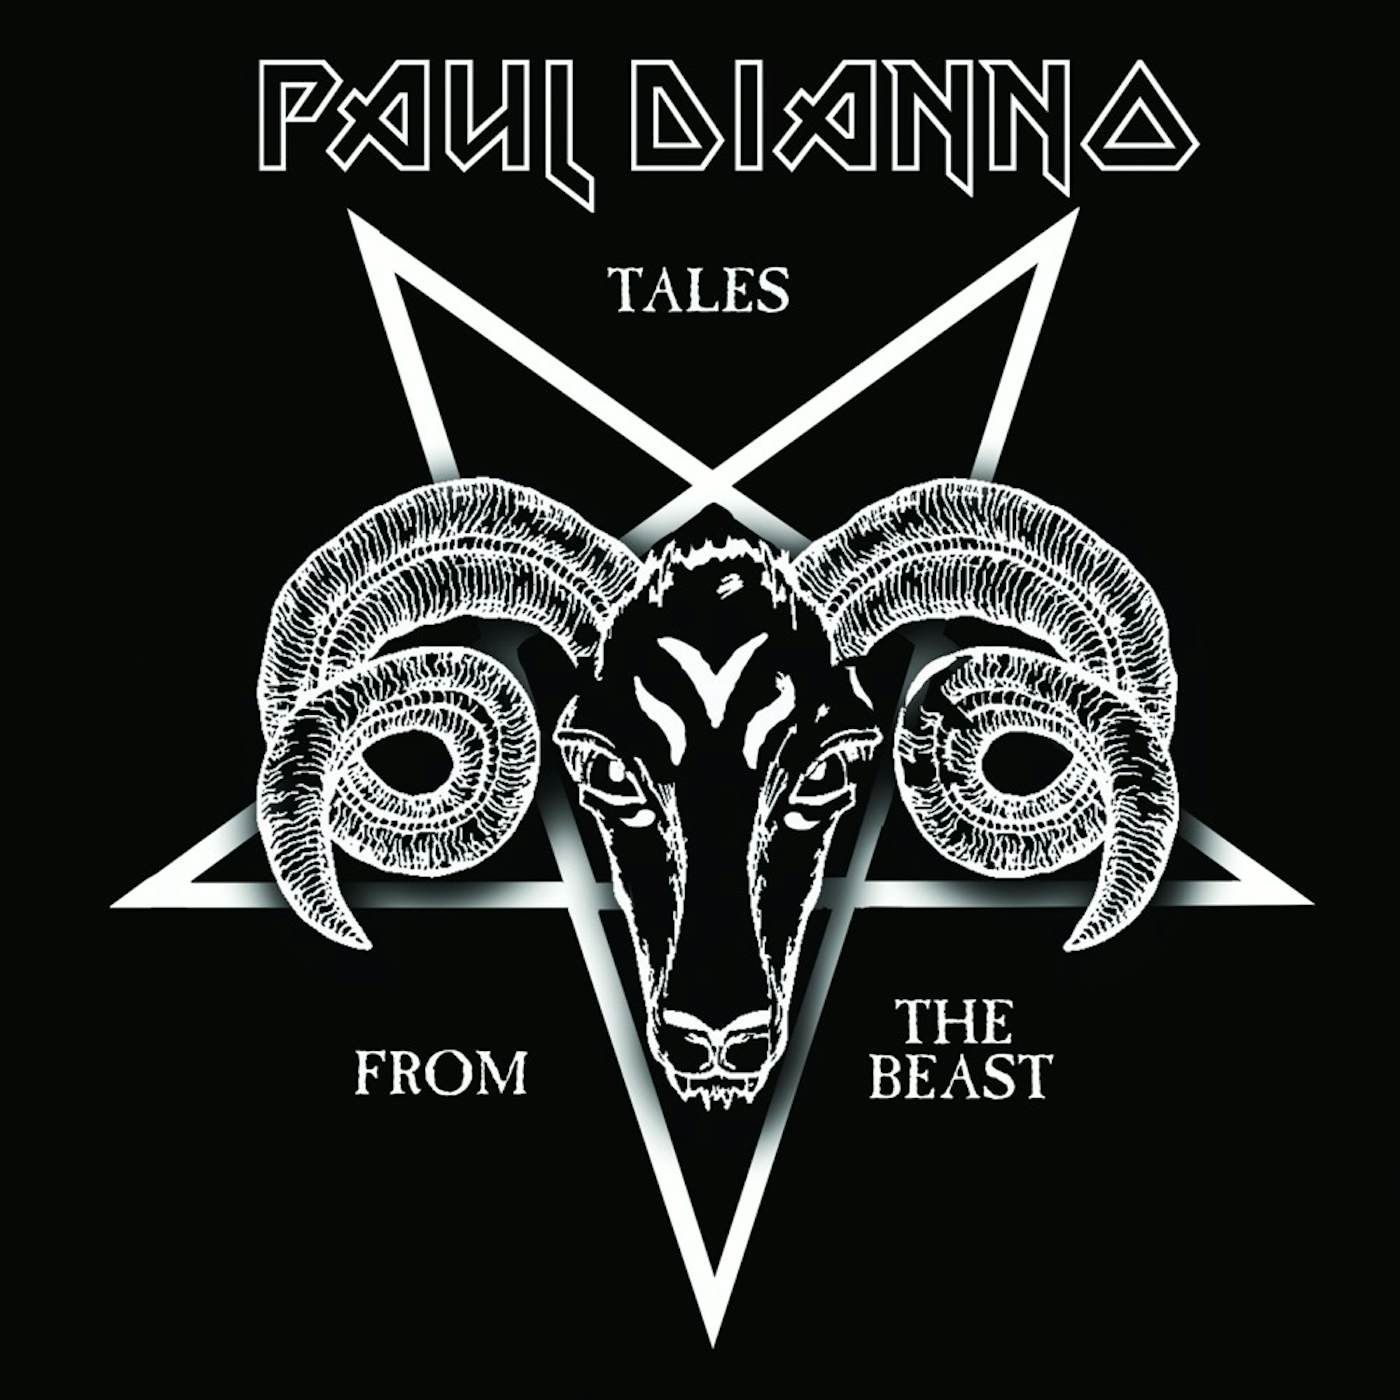 Paul Di'Anno Tales From The Beast CD